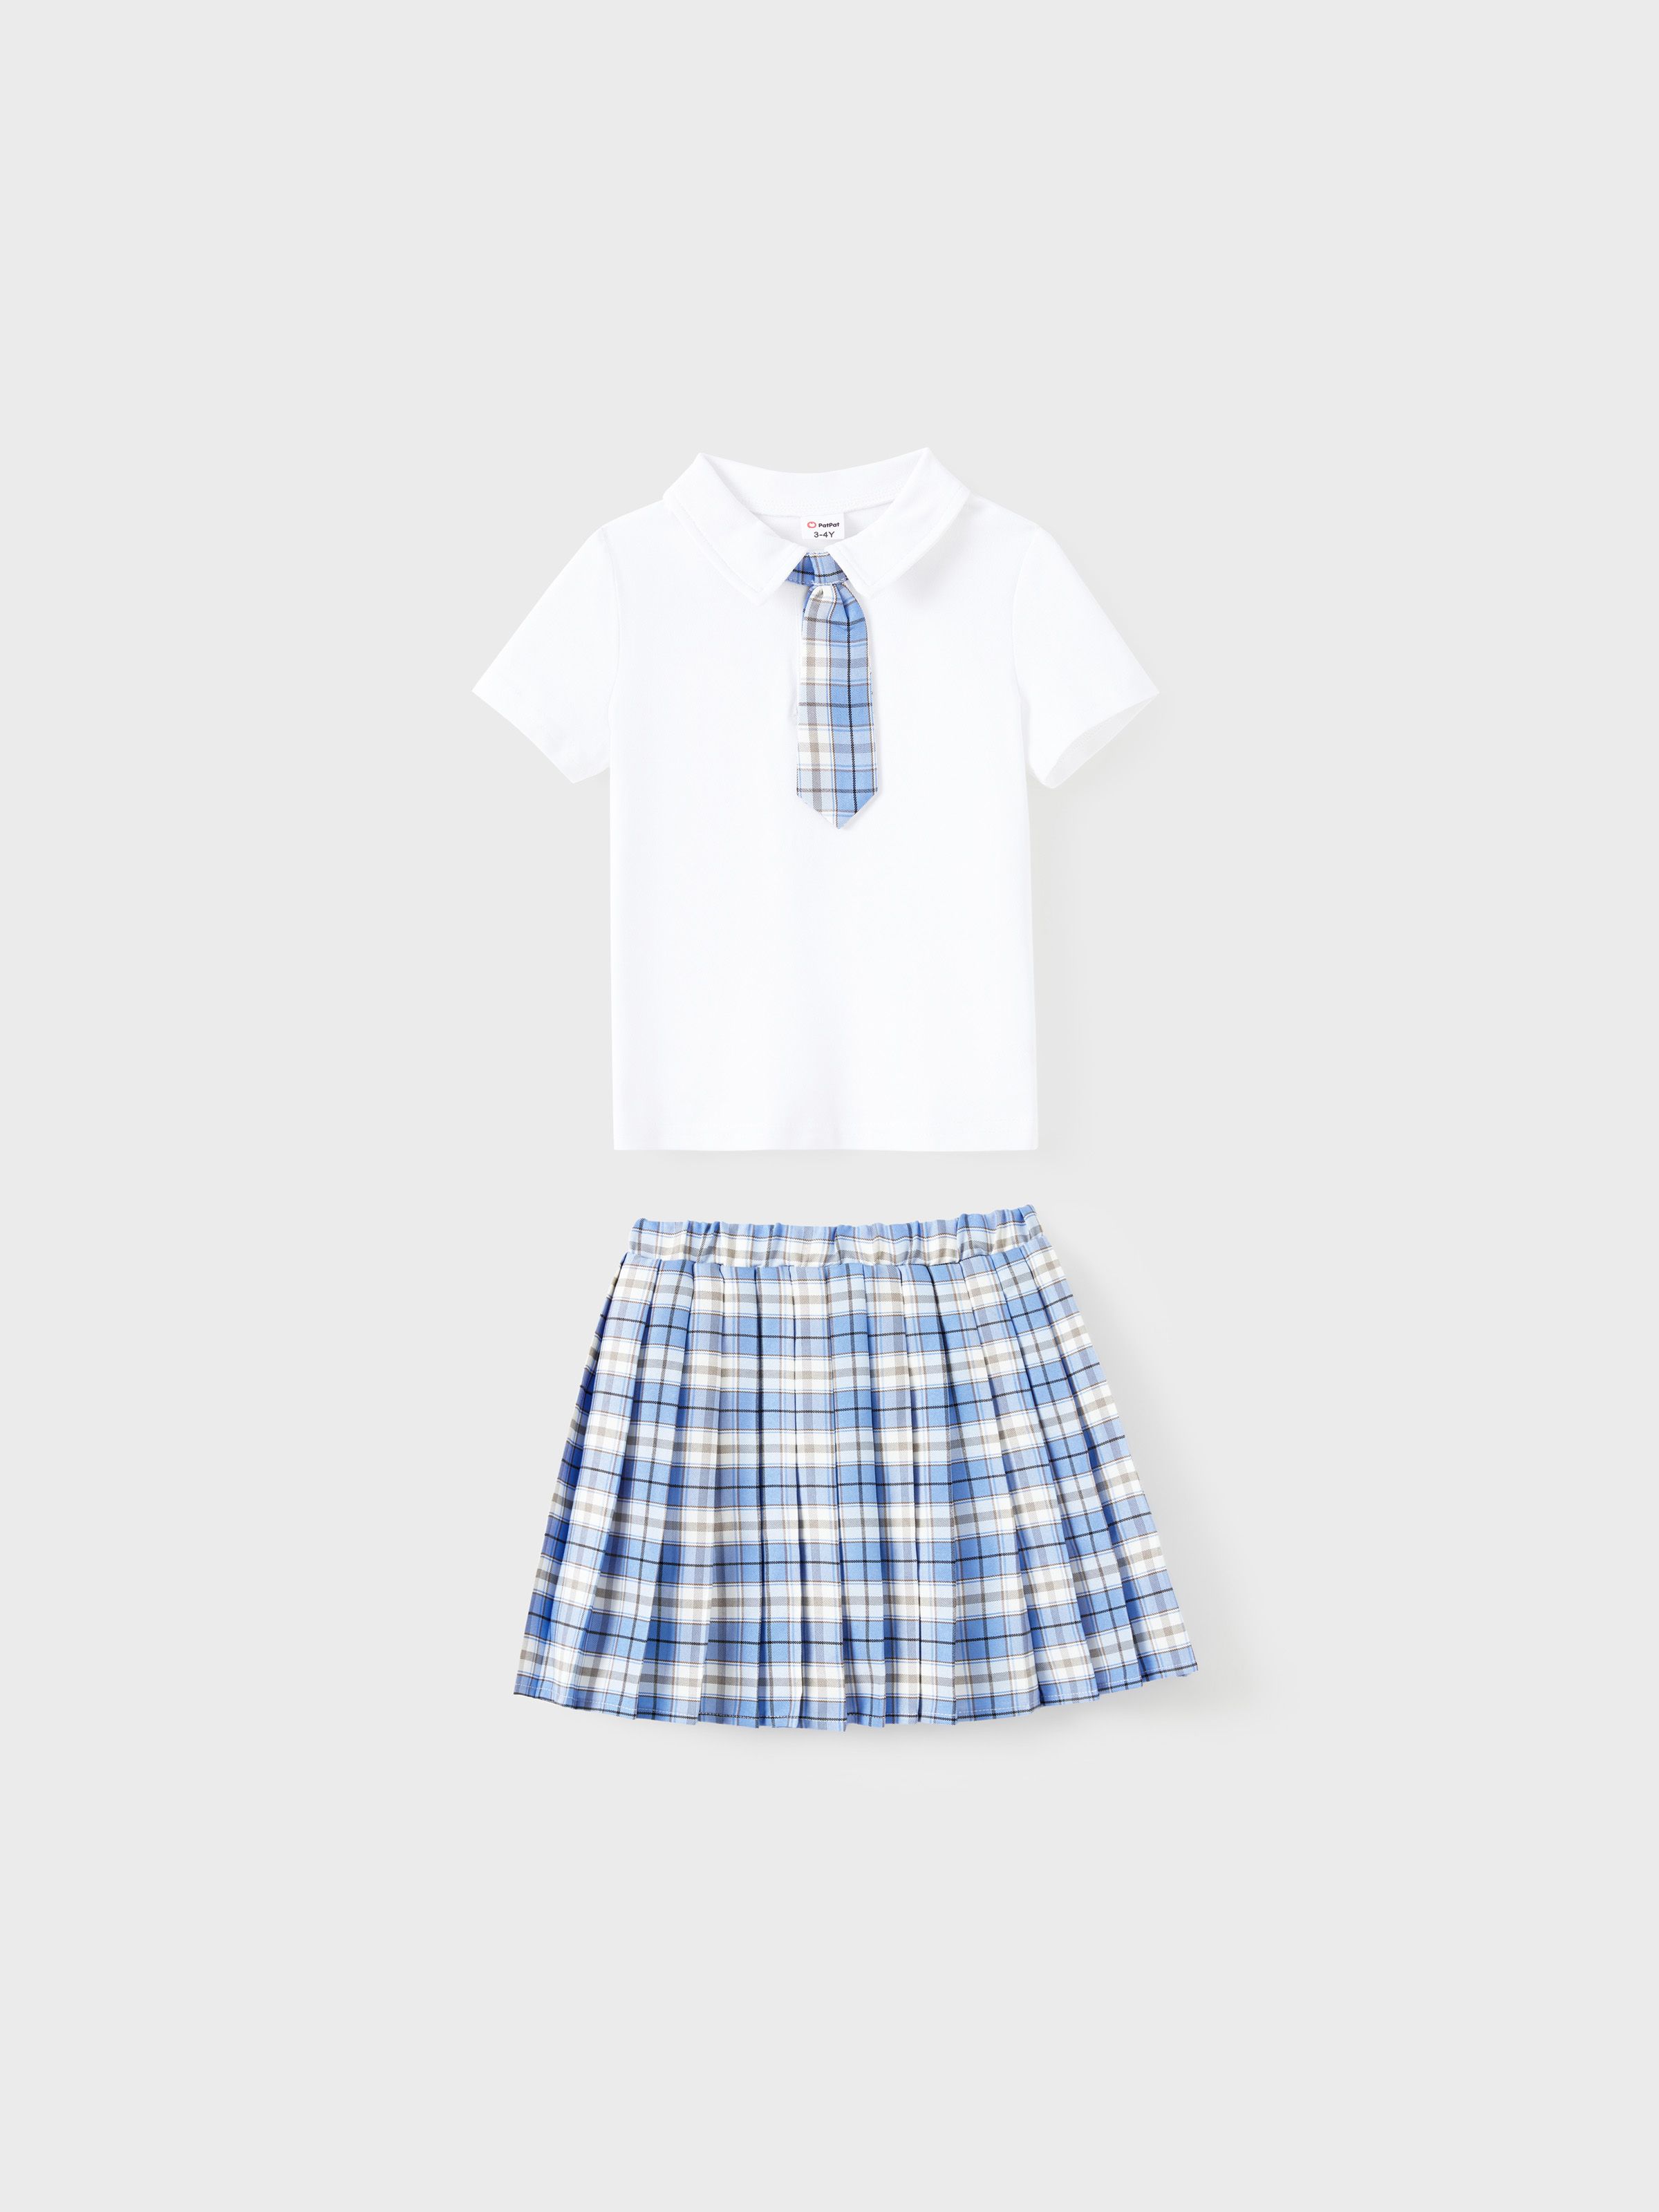 

Family Matching Sets Preppy Style Blue Plaid Shirt or School Uniform Vibe Co-ord Set with Tie